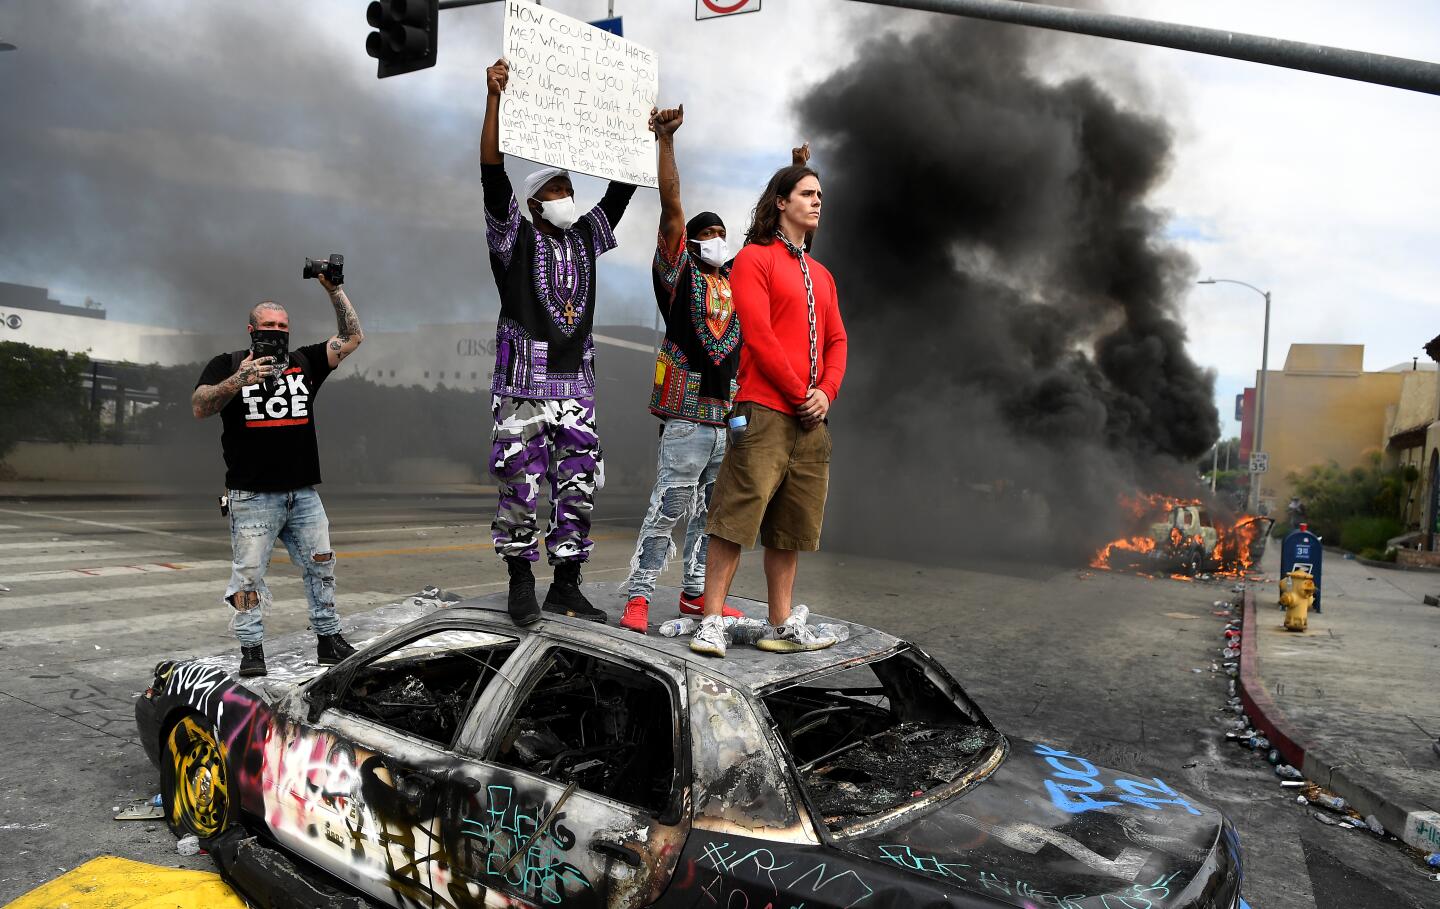 Protestors stand on top of a burned LAPD cruiser as another burns at 3rd Street and Fairfax Avenue in Los Angeles on Saturday.